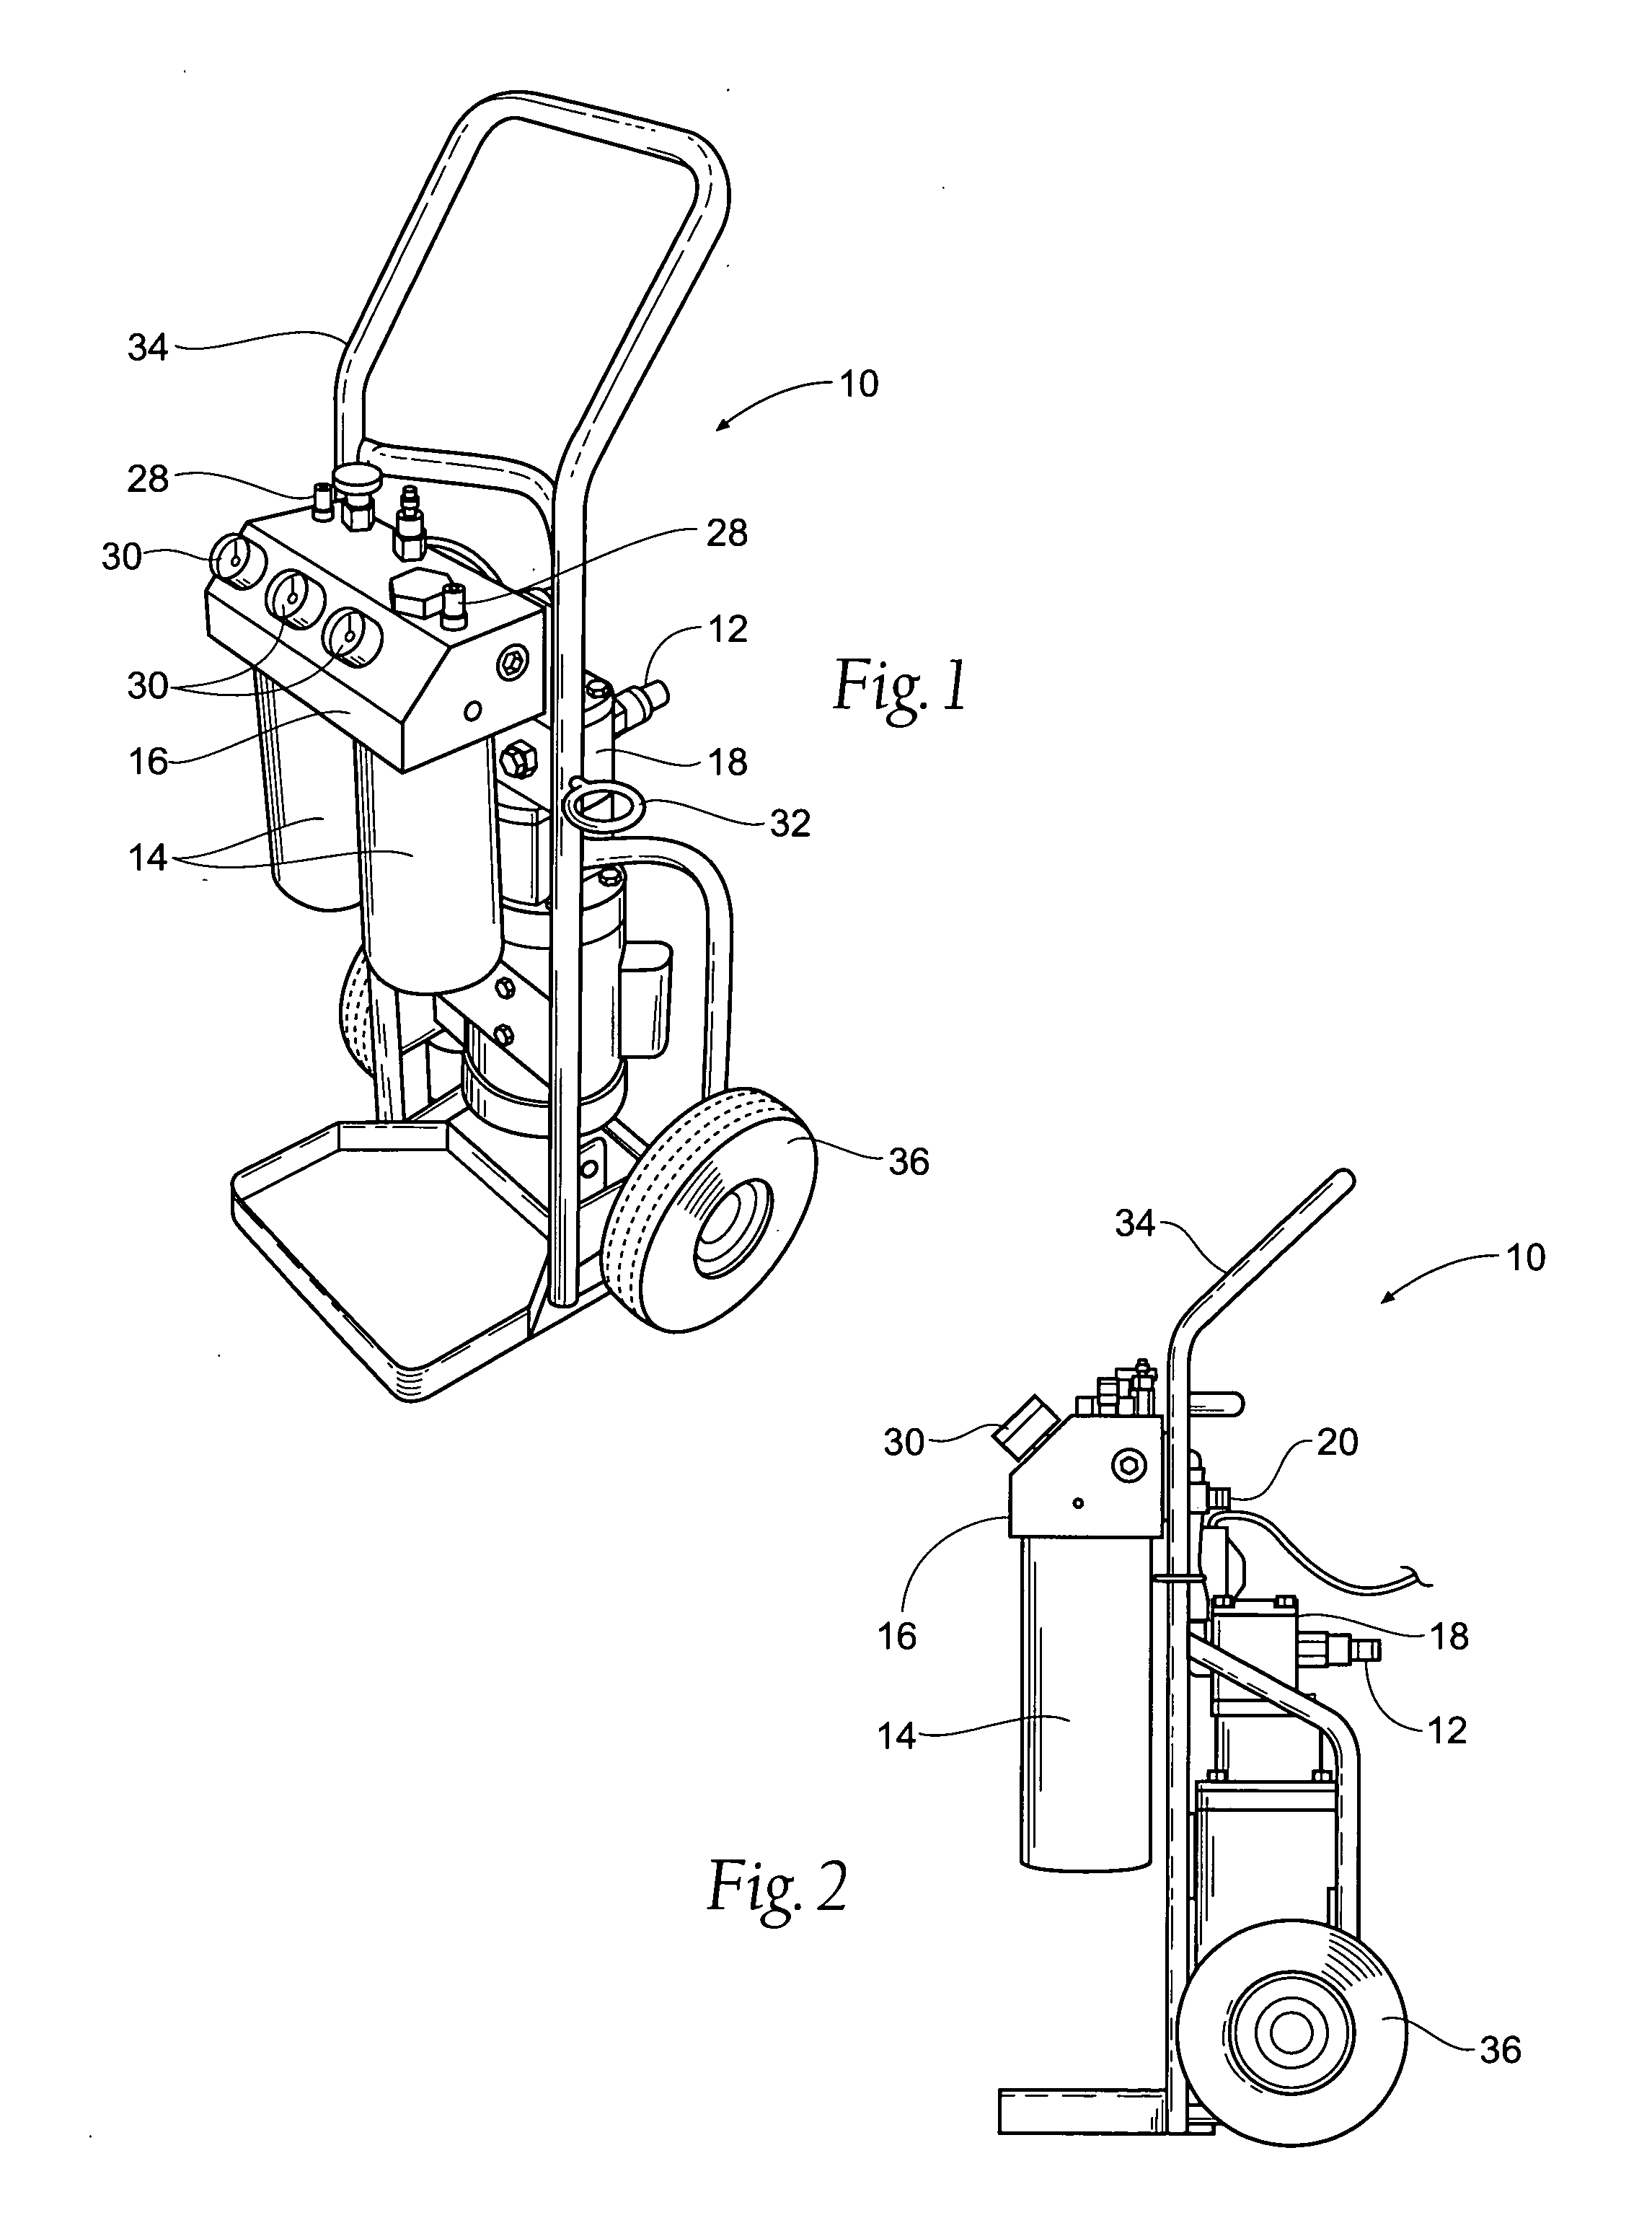 Portable Lubricant filtration system and method